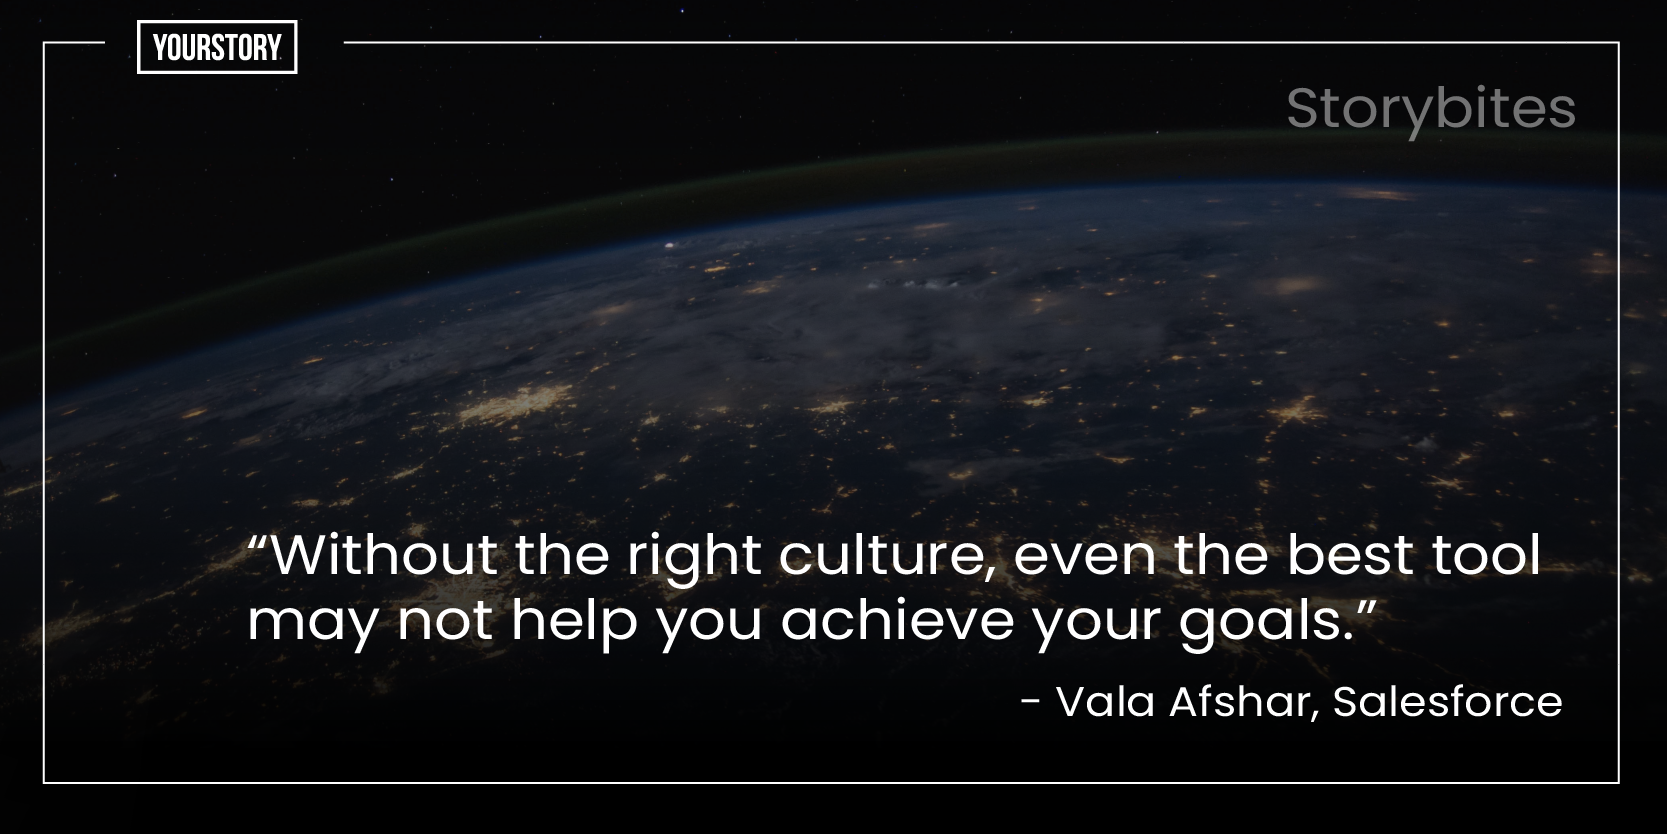 ‘Without the right culture, even the best tool may not help you achieve your goals’ – 35 quotes on digital transformation